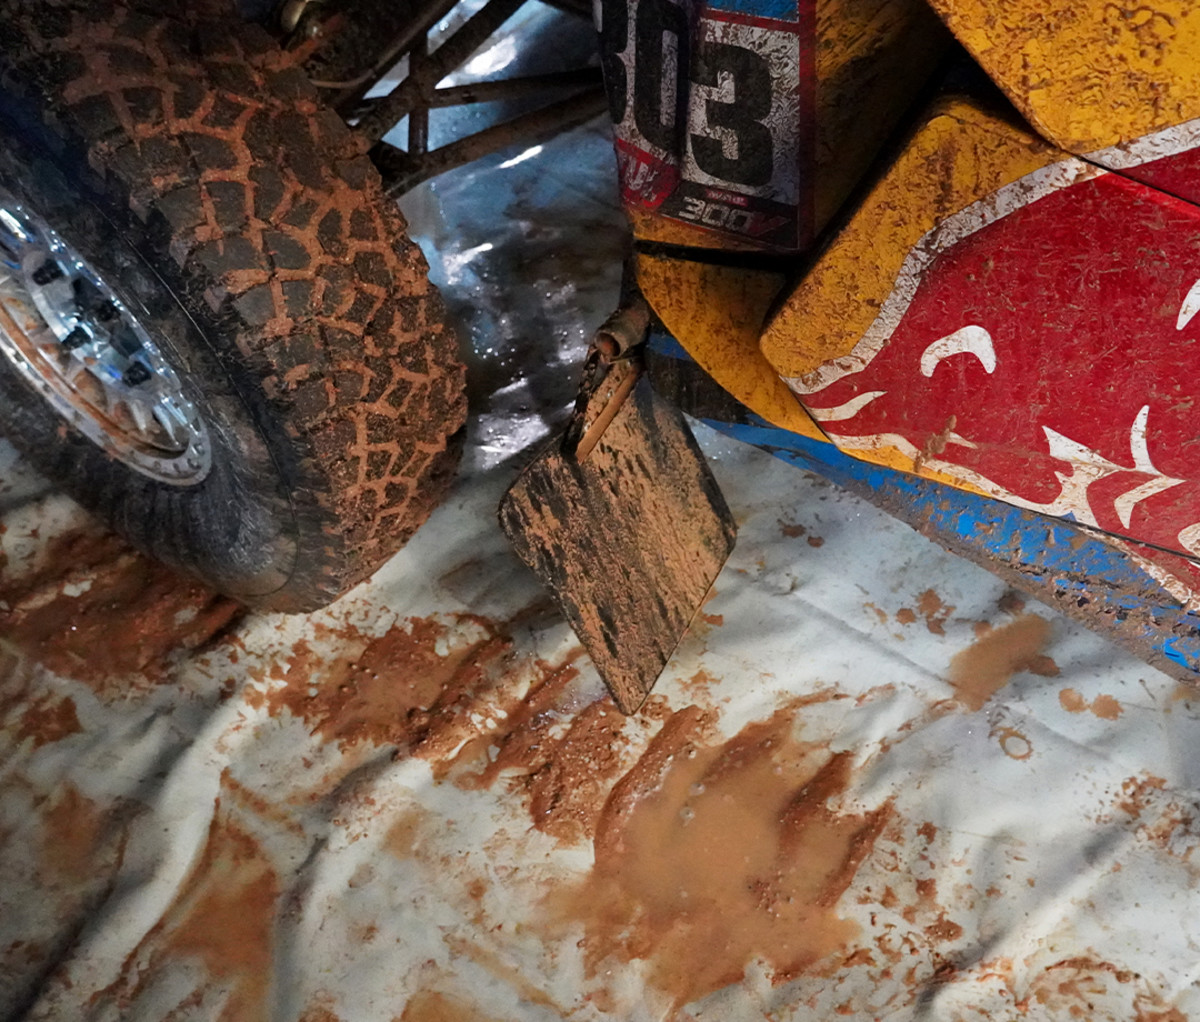 Muddy tire of a Dakar side by side off-roader in front of a muddy mud flap.